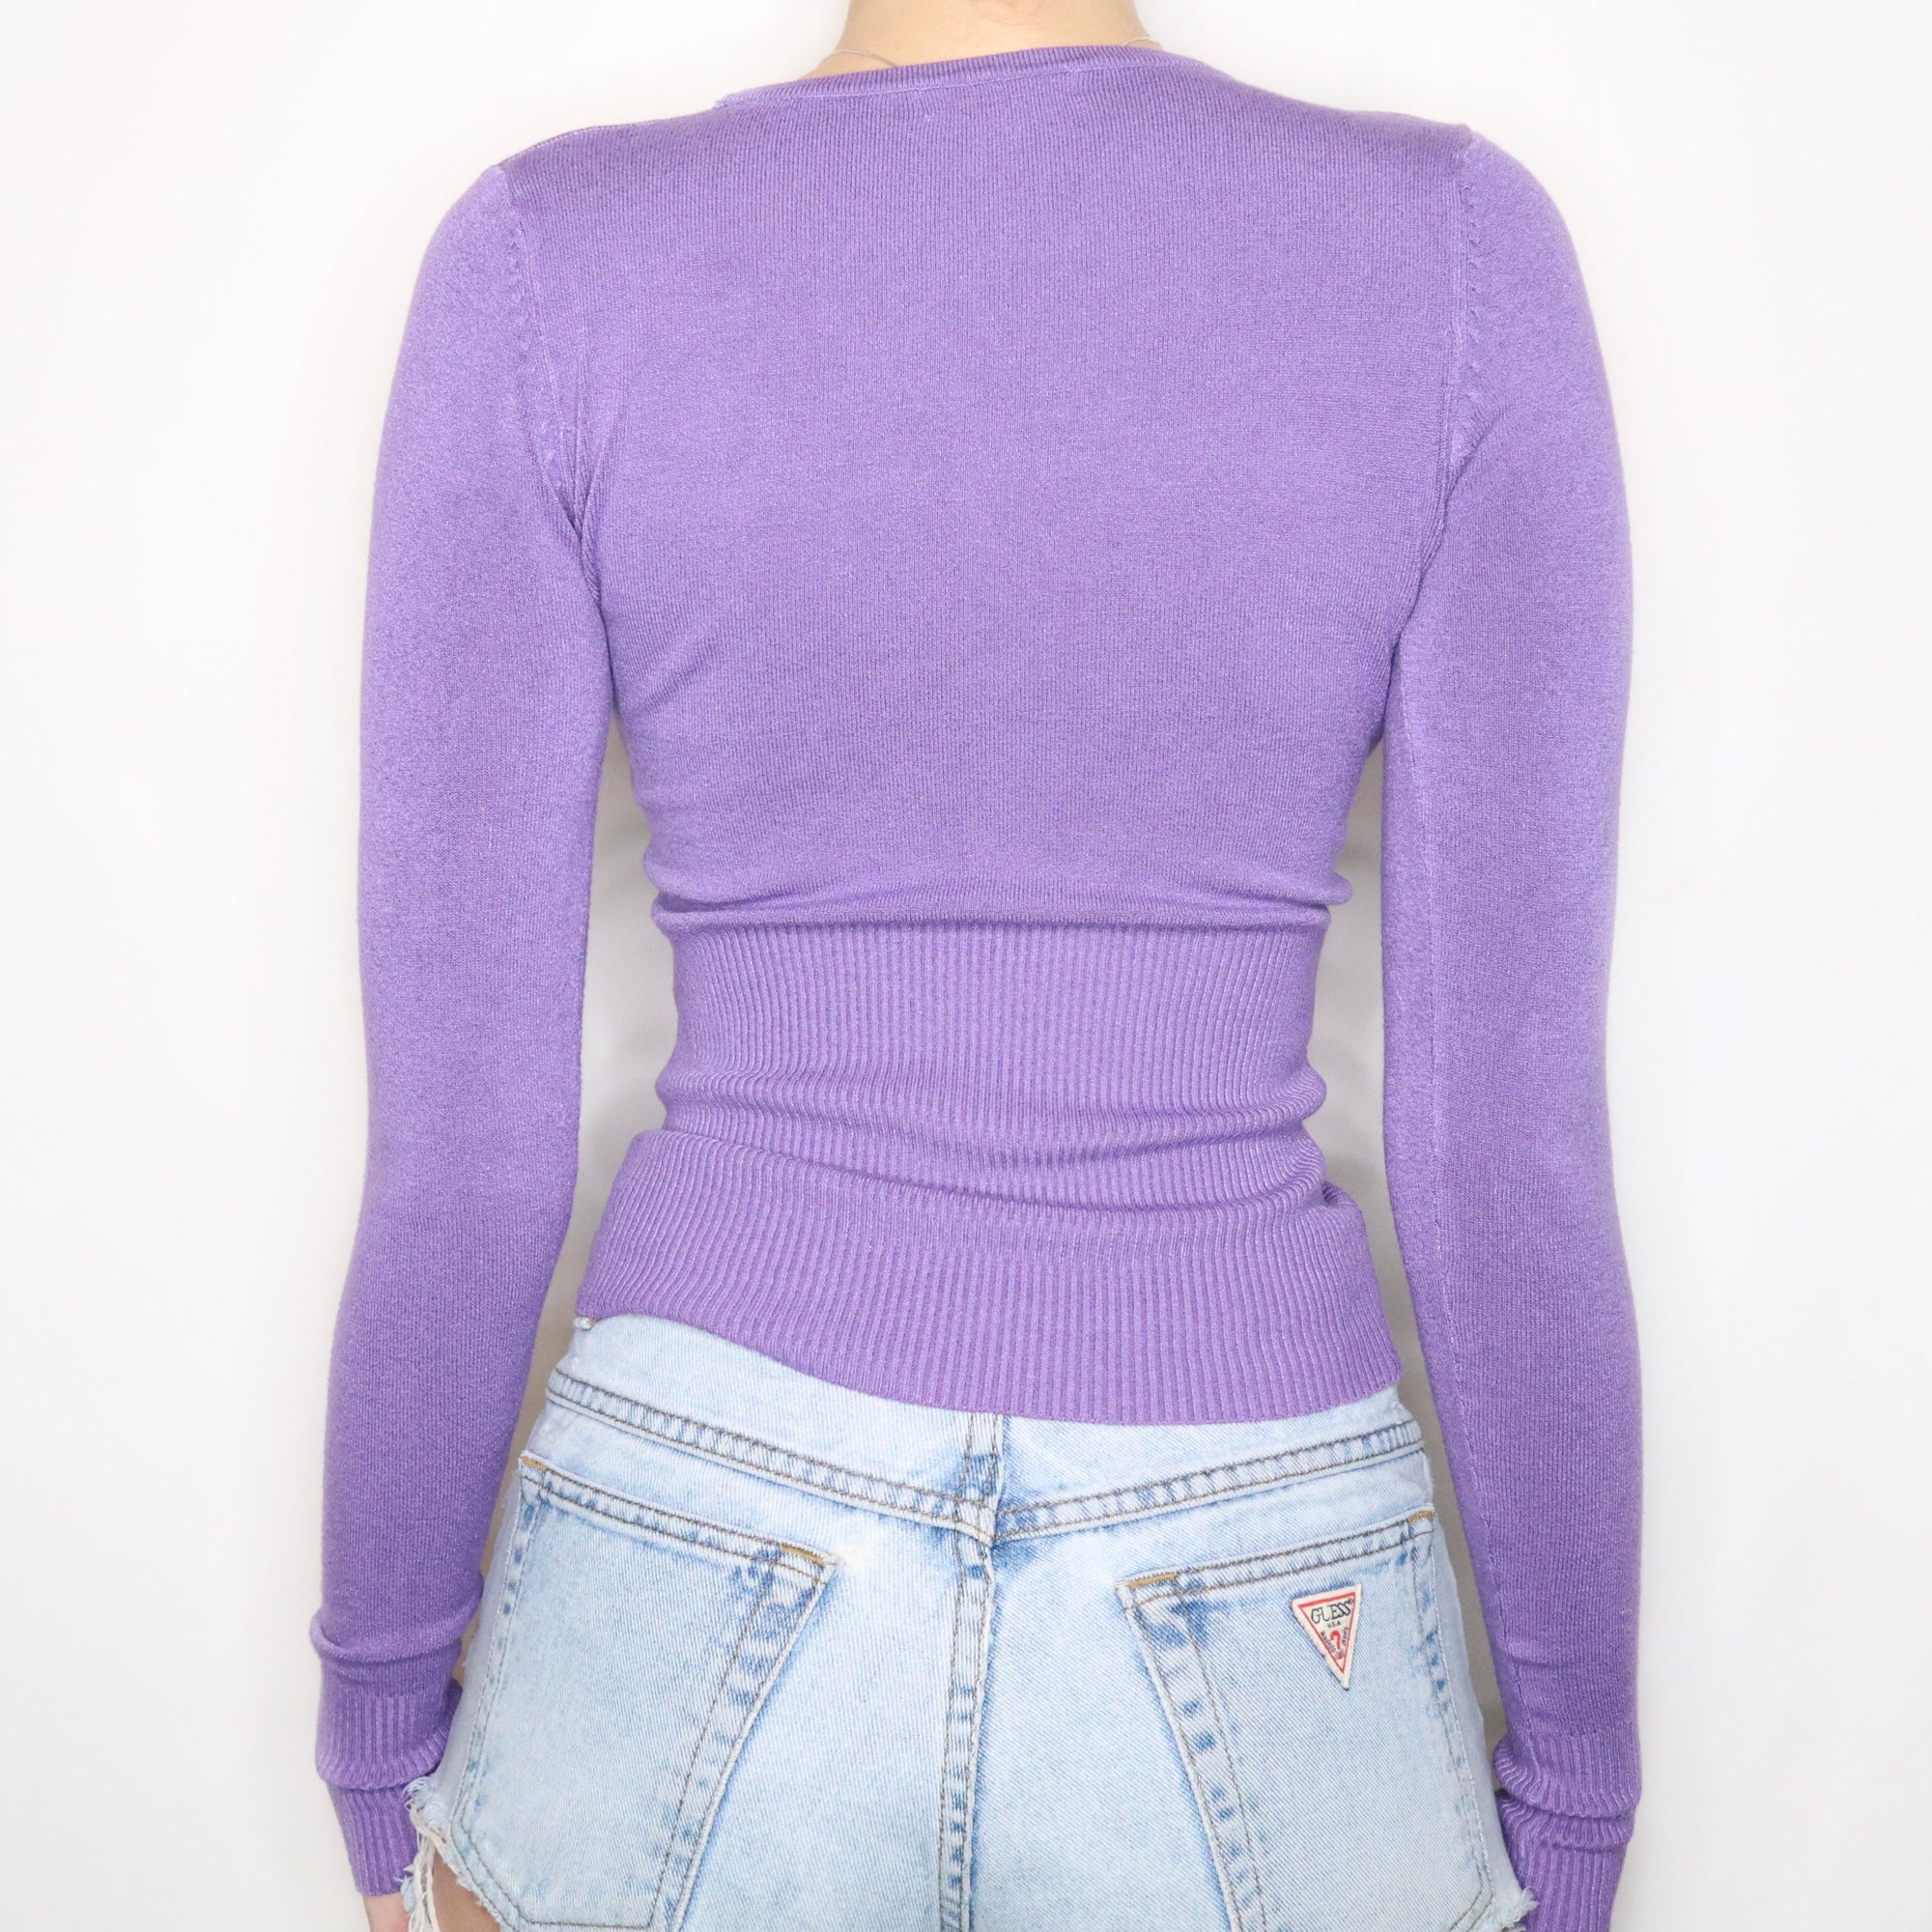 Early 2000s Soft Stretchy Purple Cardigan